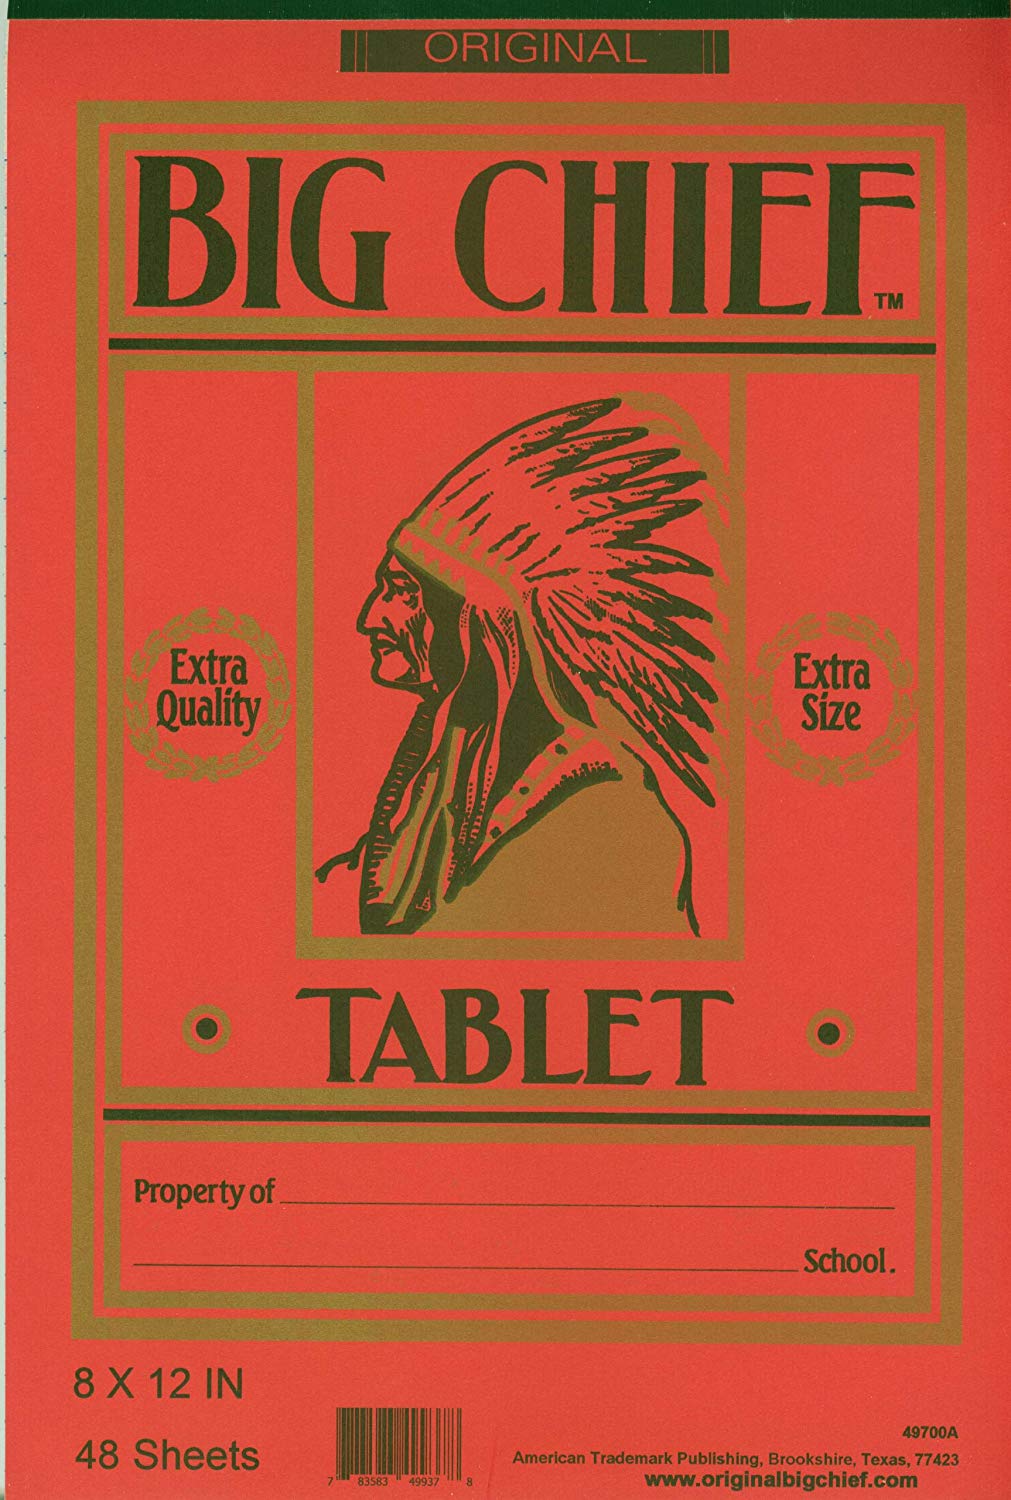 Big Chief Writing Tablet - Laura Ingalls Wilder Historic Home & Museum